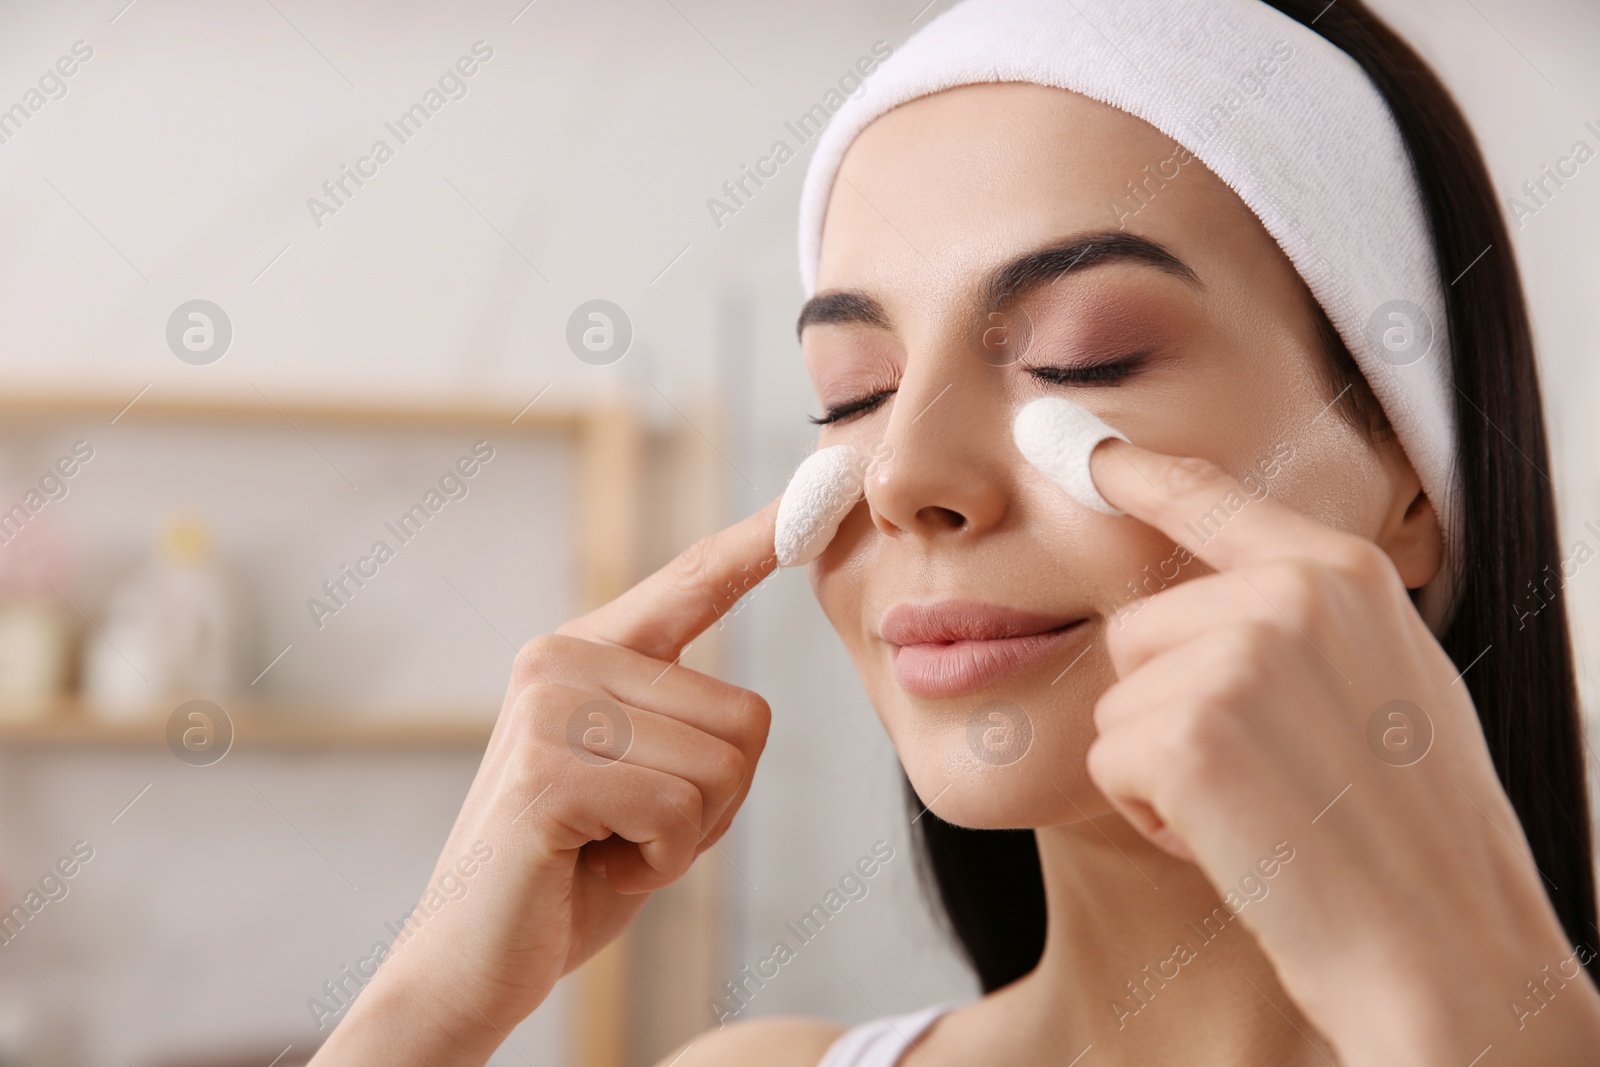 Photo of Woman using silkworm cocoons in skin care routine at home, closeup